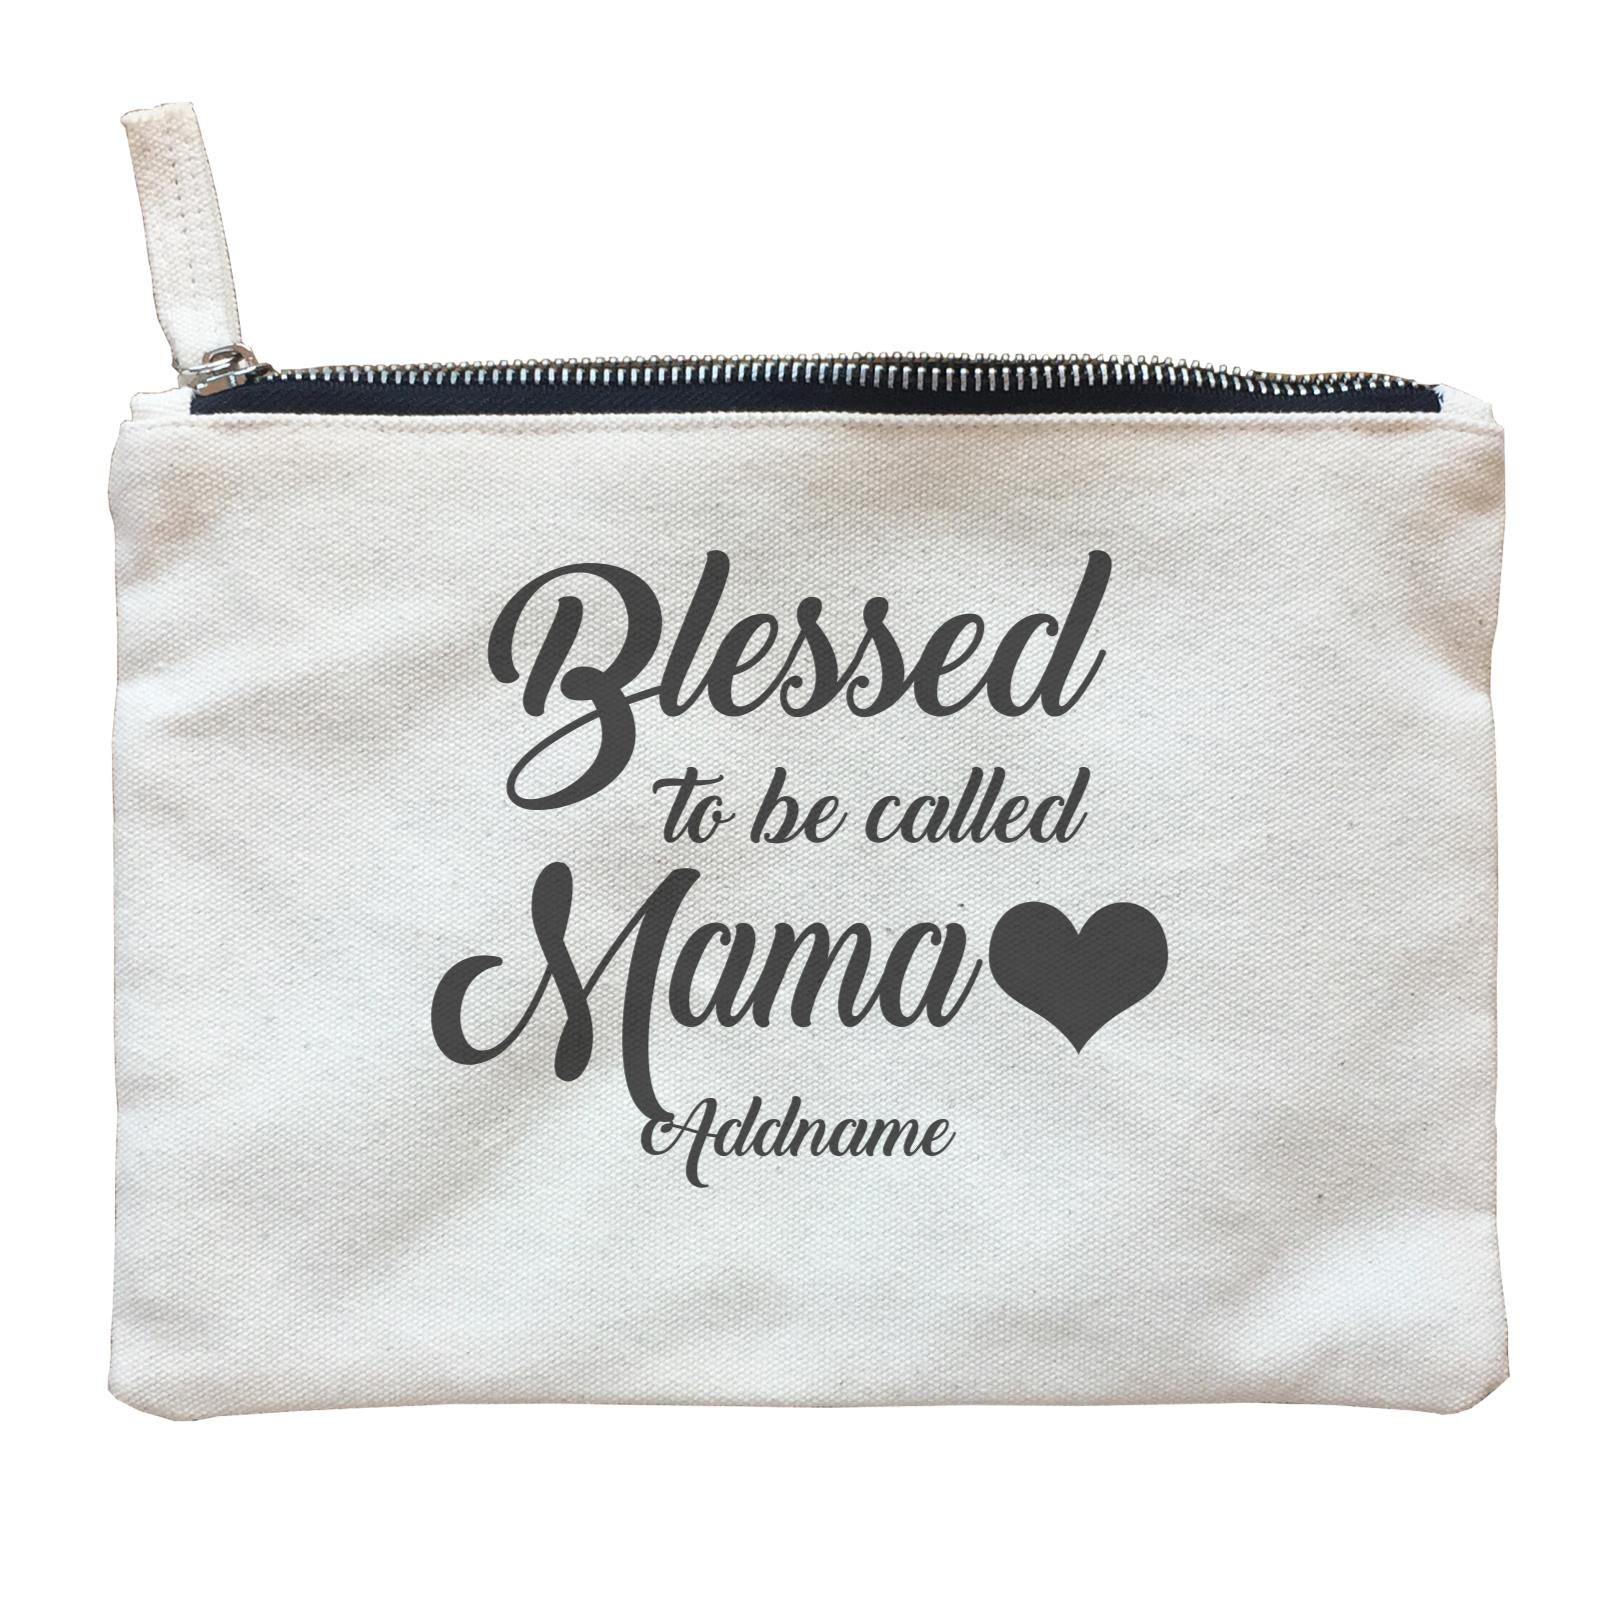 Blessed To Be Called Mama Zipper Pouch